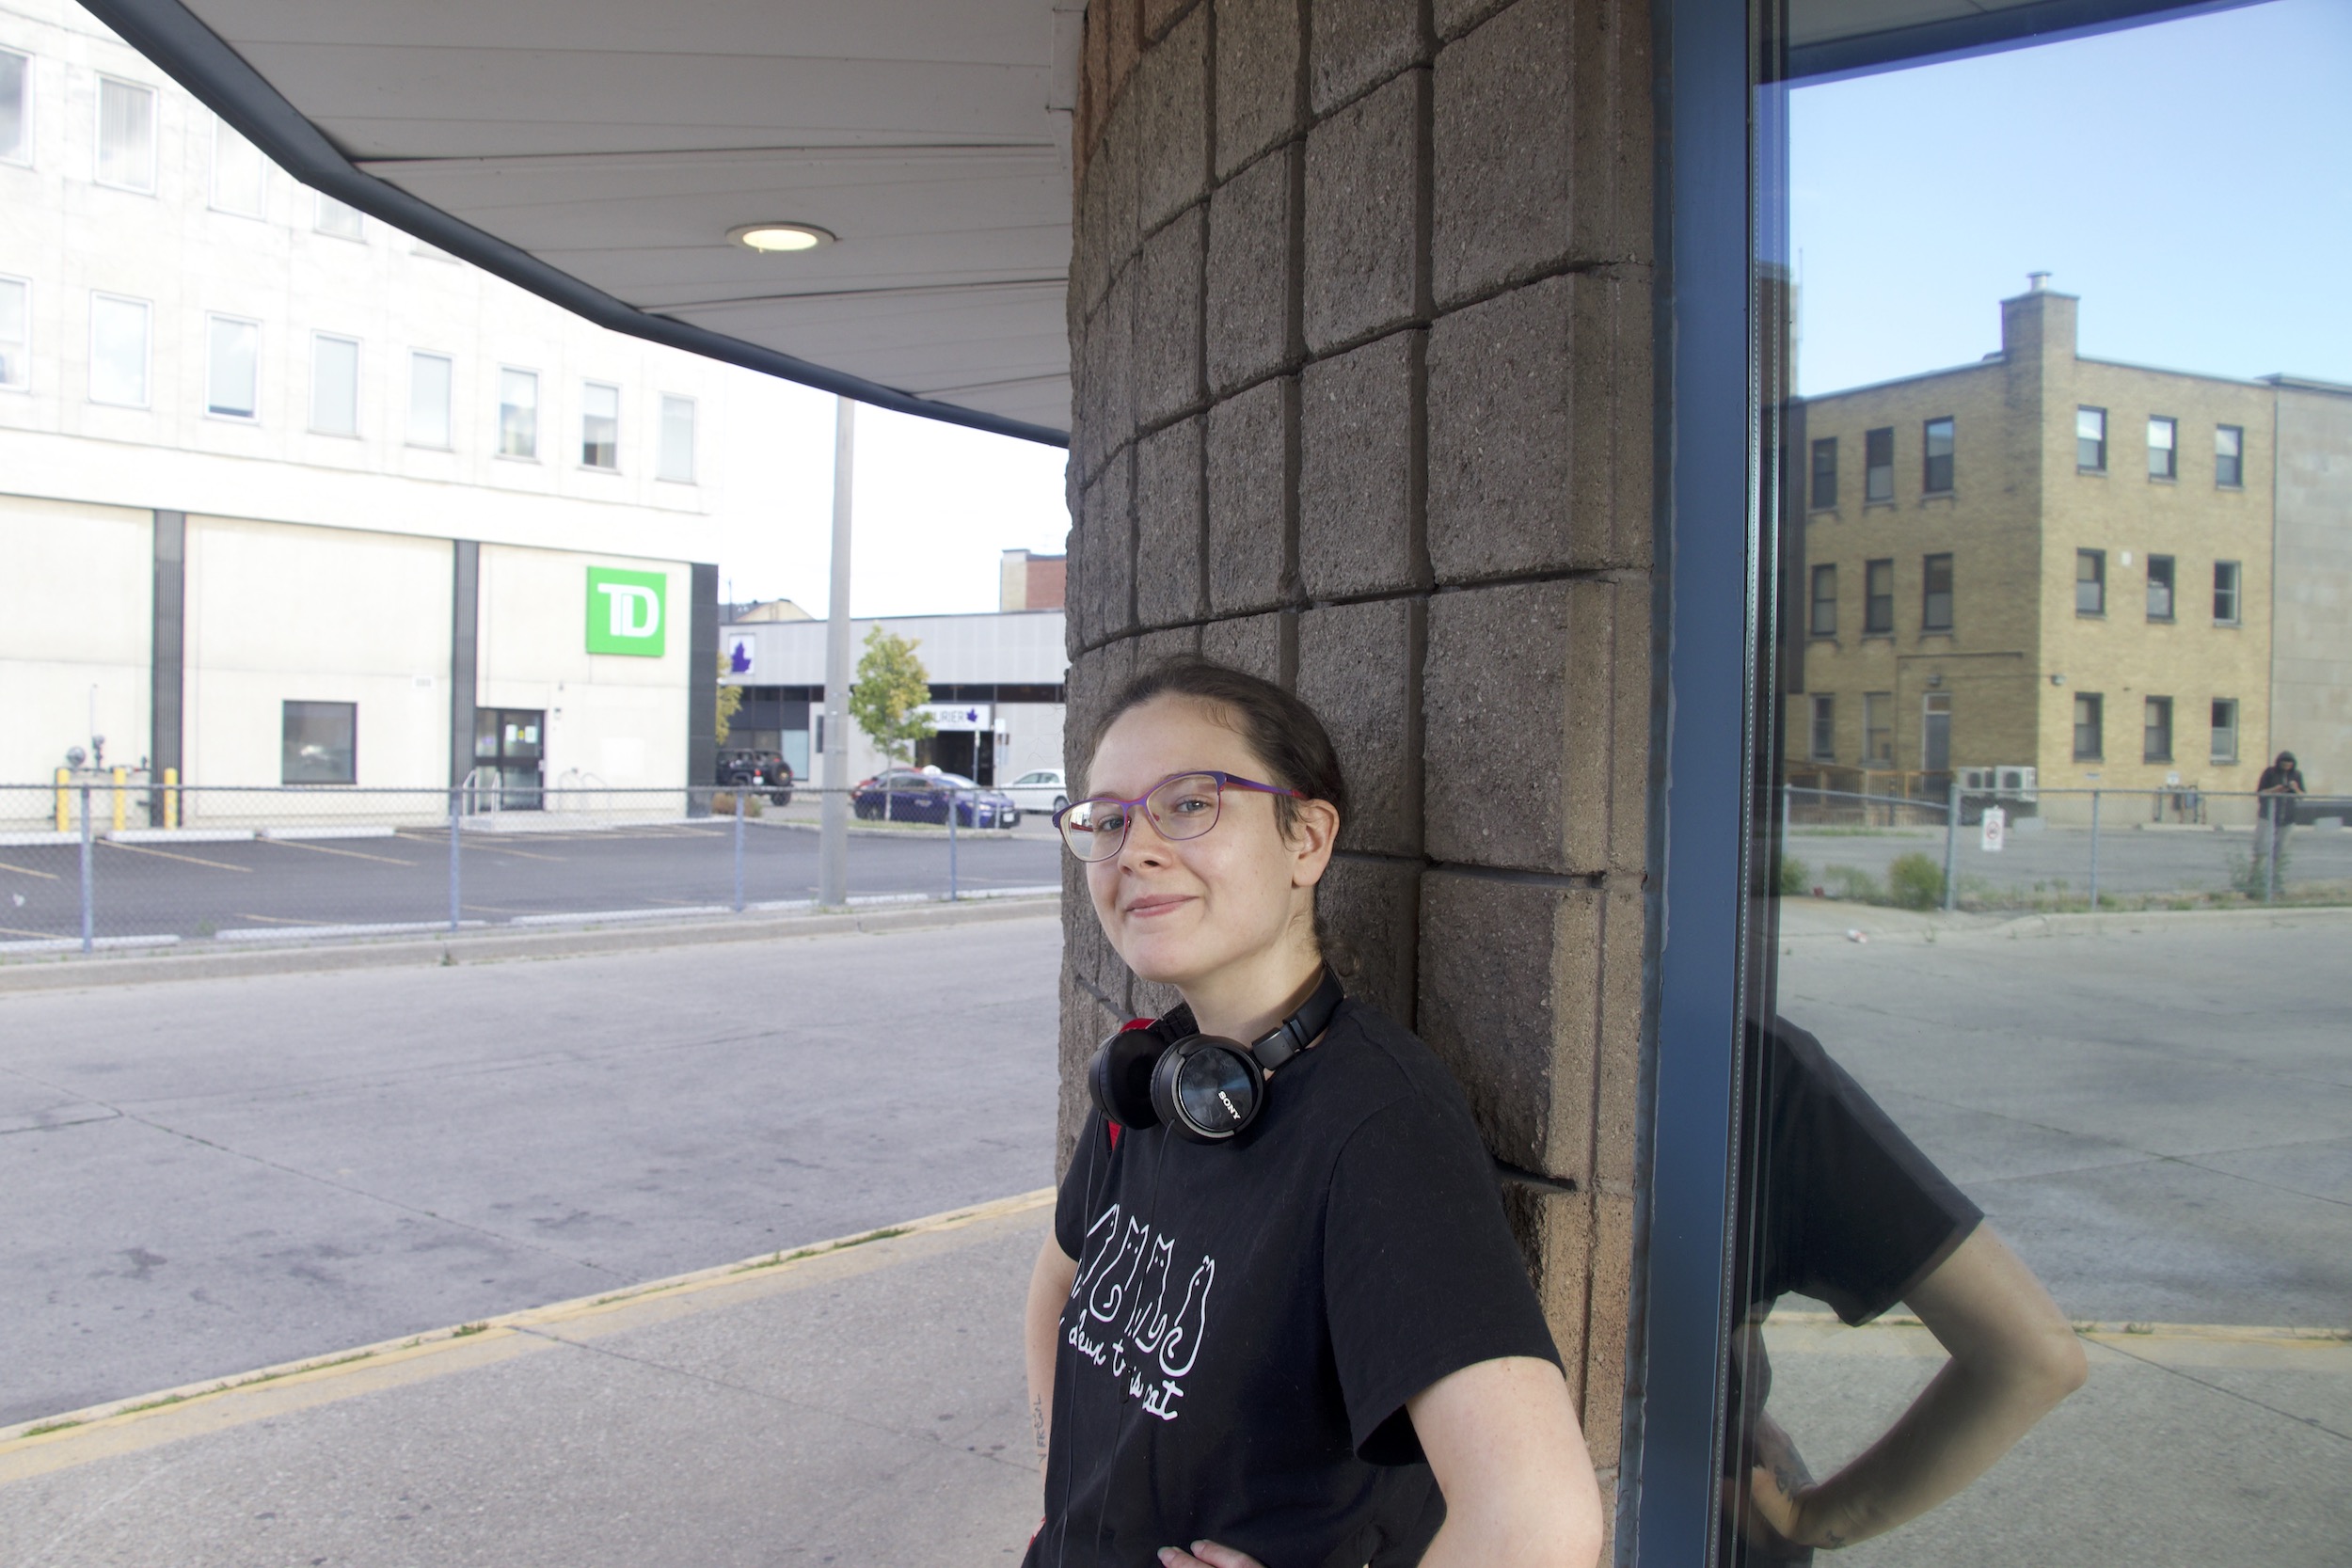 Justine Roche at the Brantford Bus Terminal.